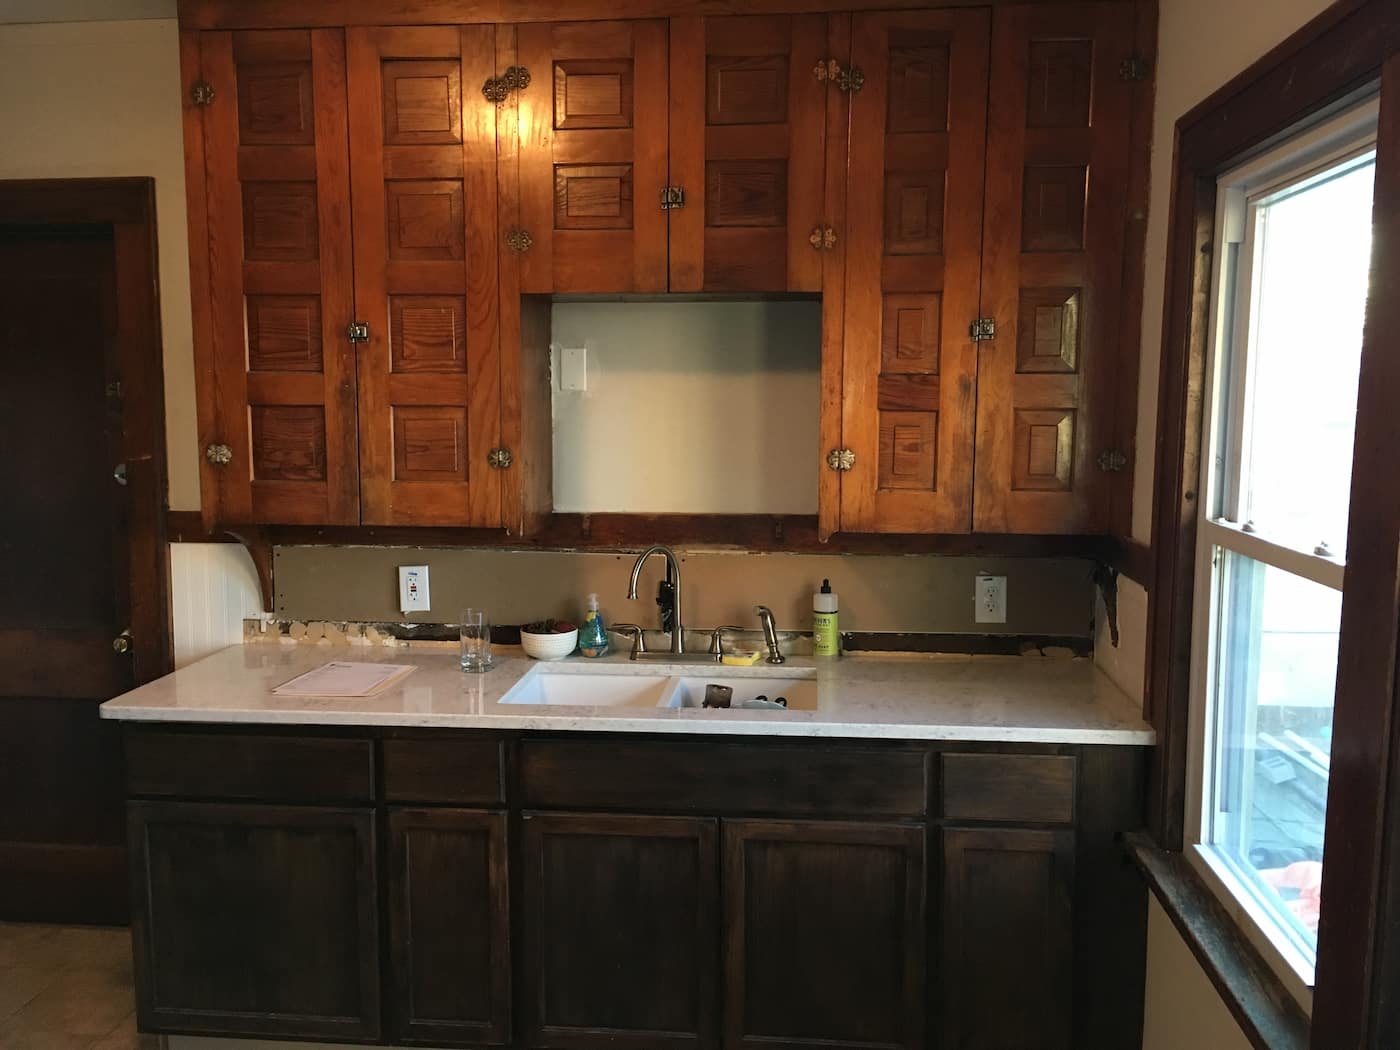 Green Kitchen Cabinet (Before)